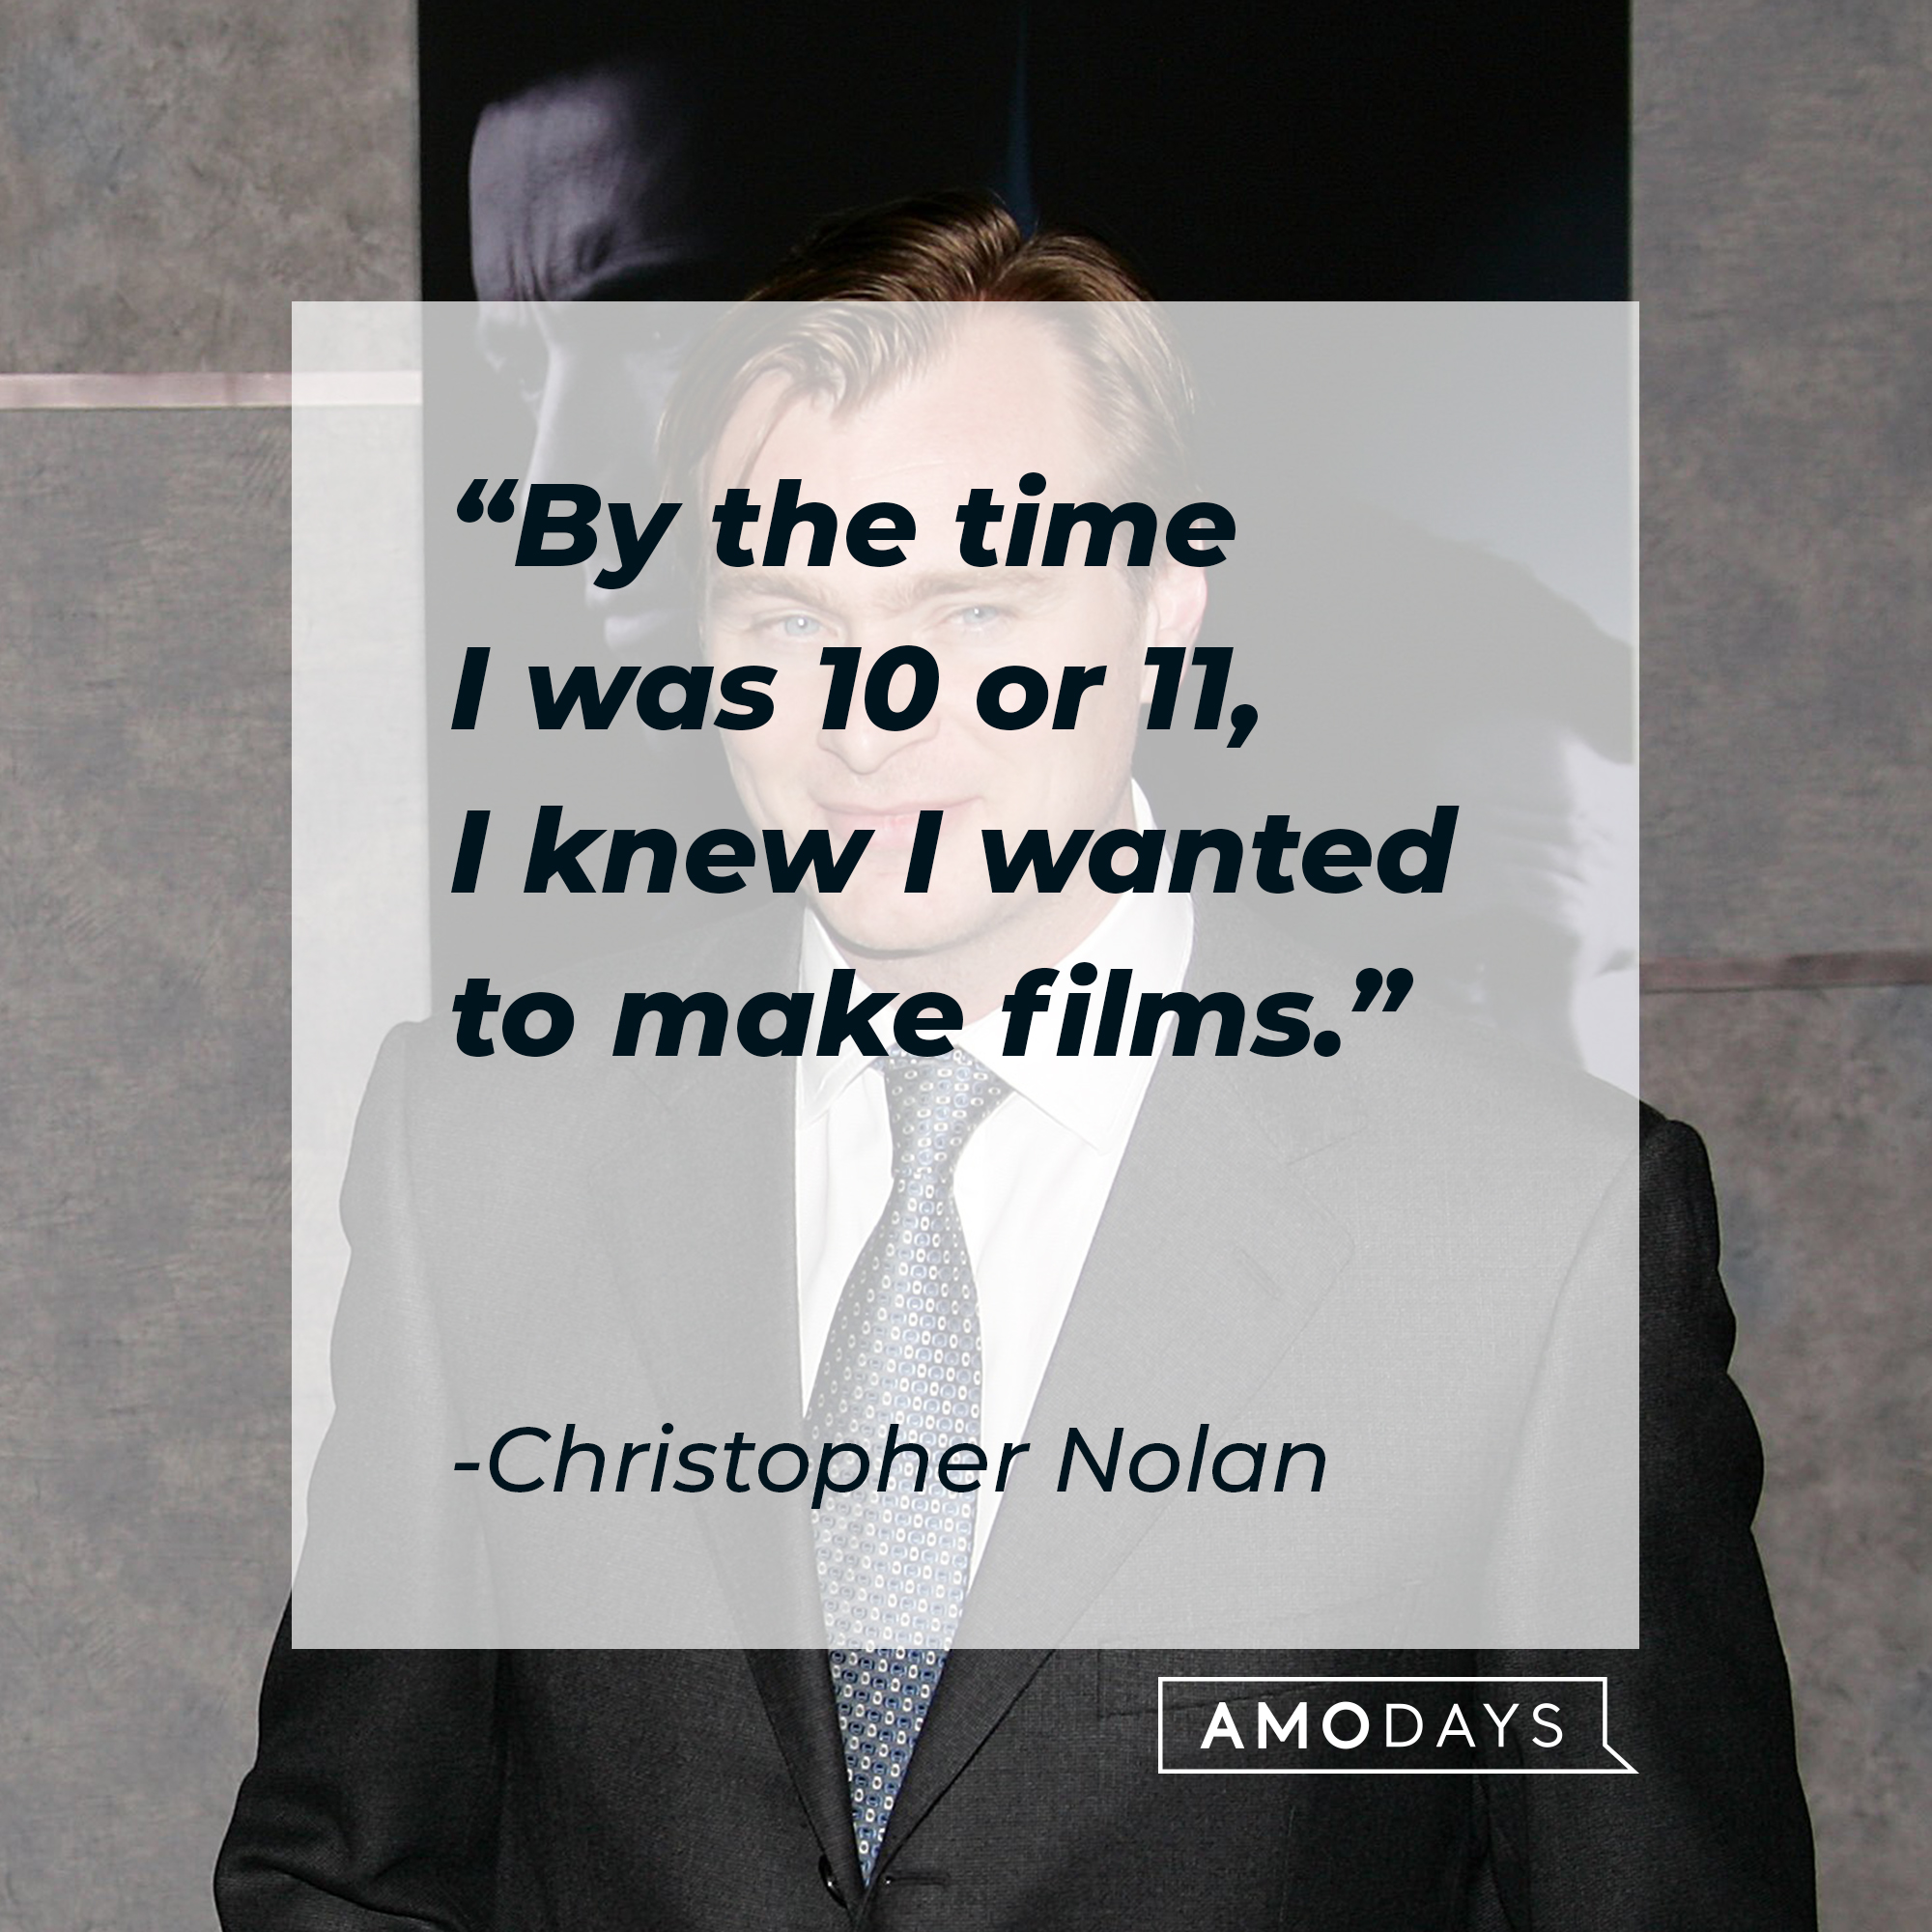 Christopher Nola, with his quote: “By the time I was ten or 11, I knew I wanted to make films.” | Source: Getty Images